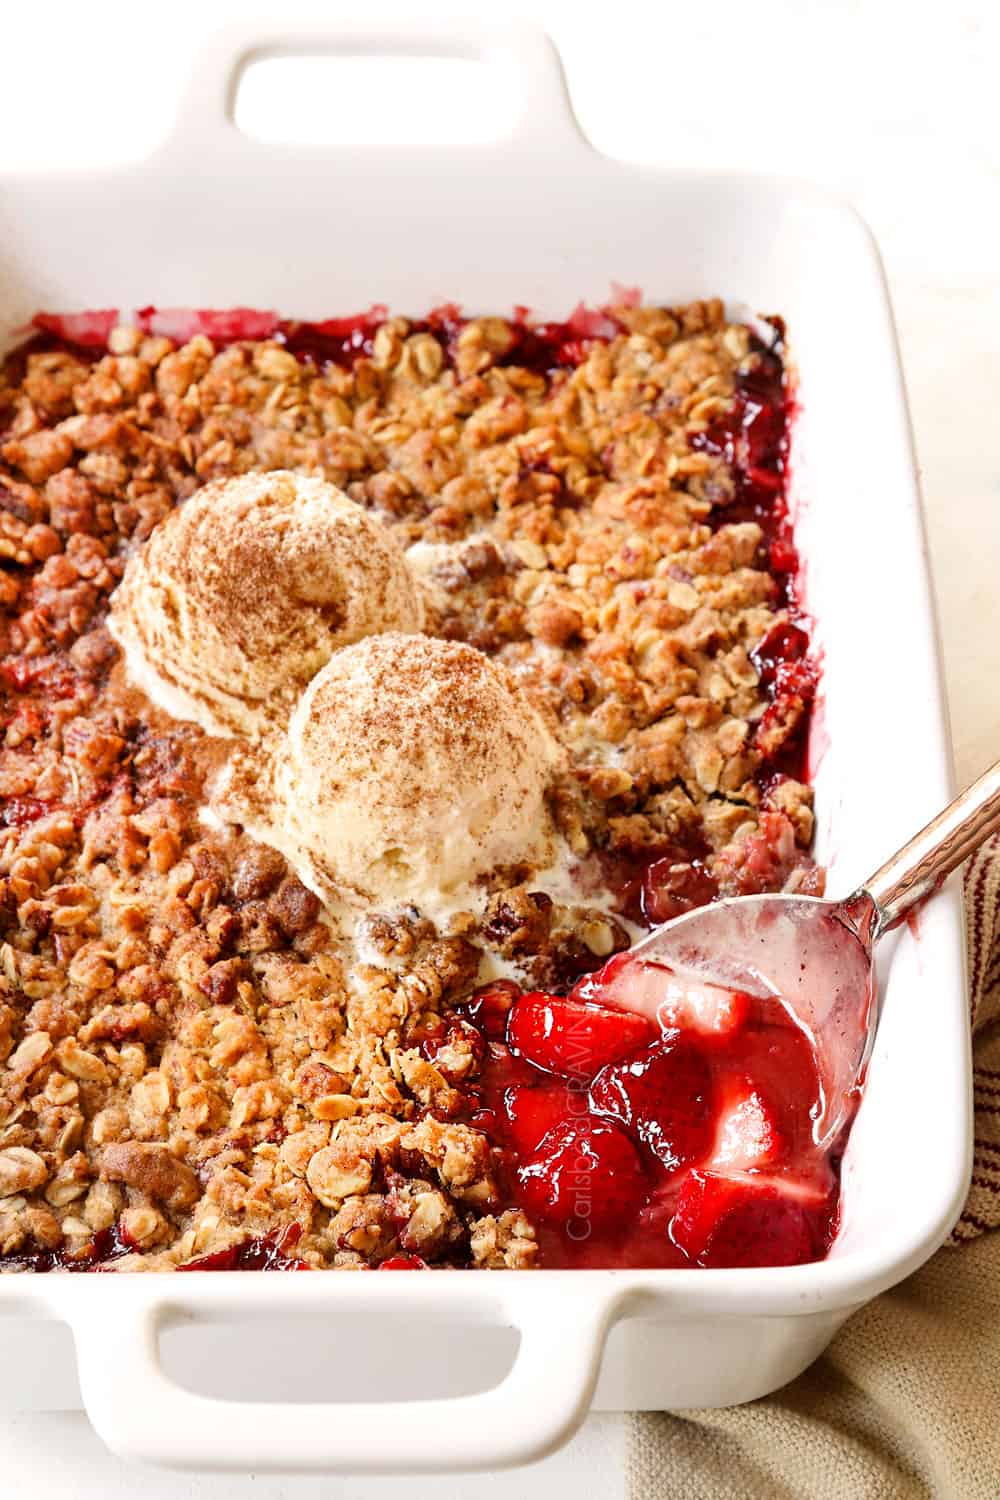 strawberry crisp recipe (or crumble) baked in a white dish with a serving spoon scooping up the strawberry dessert